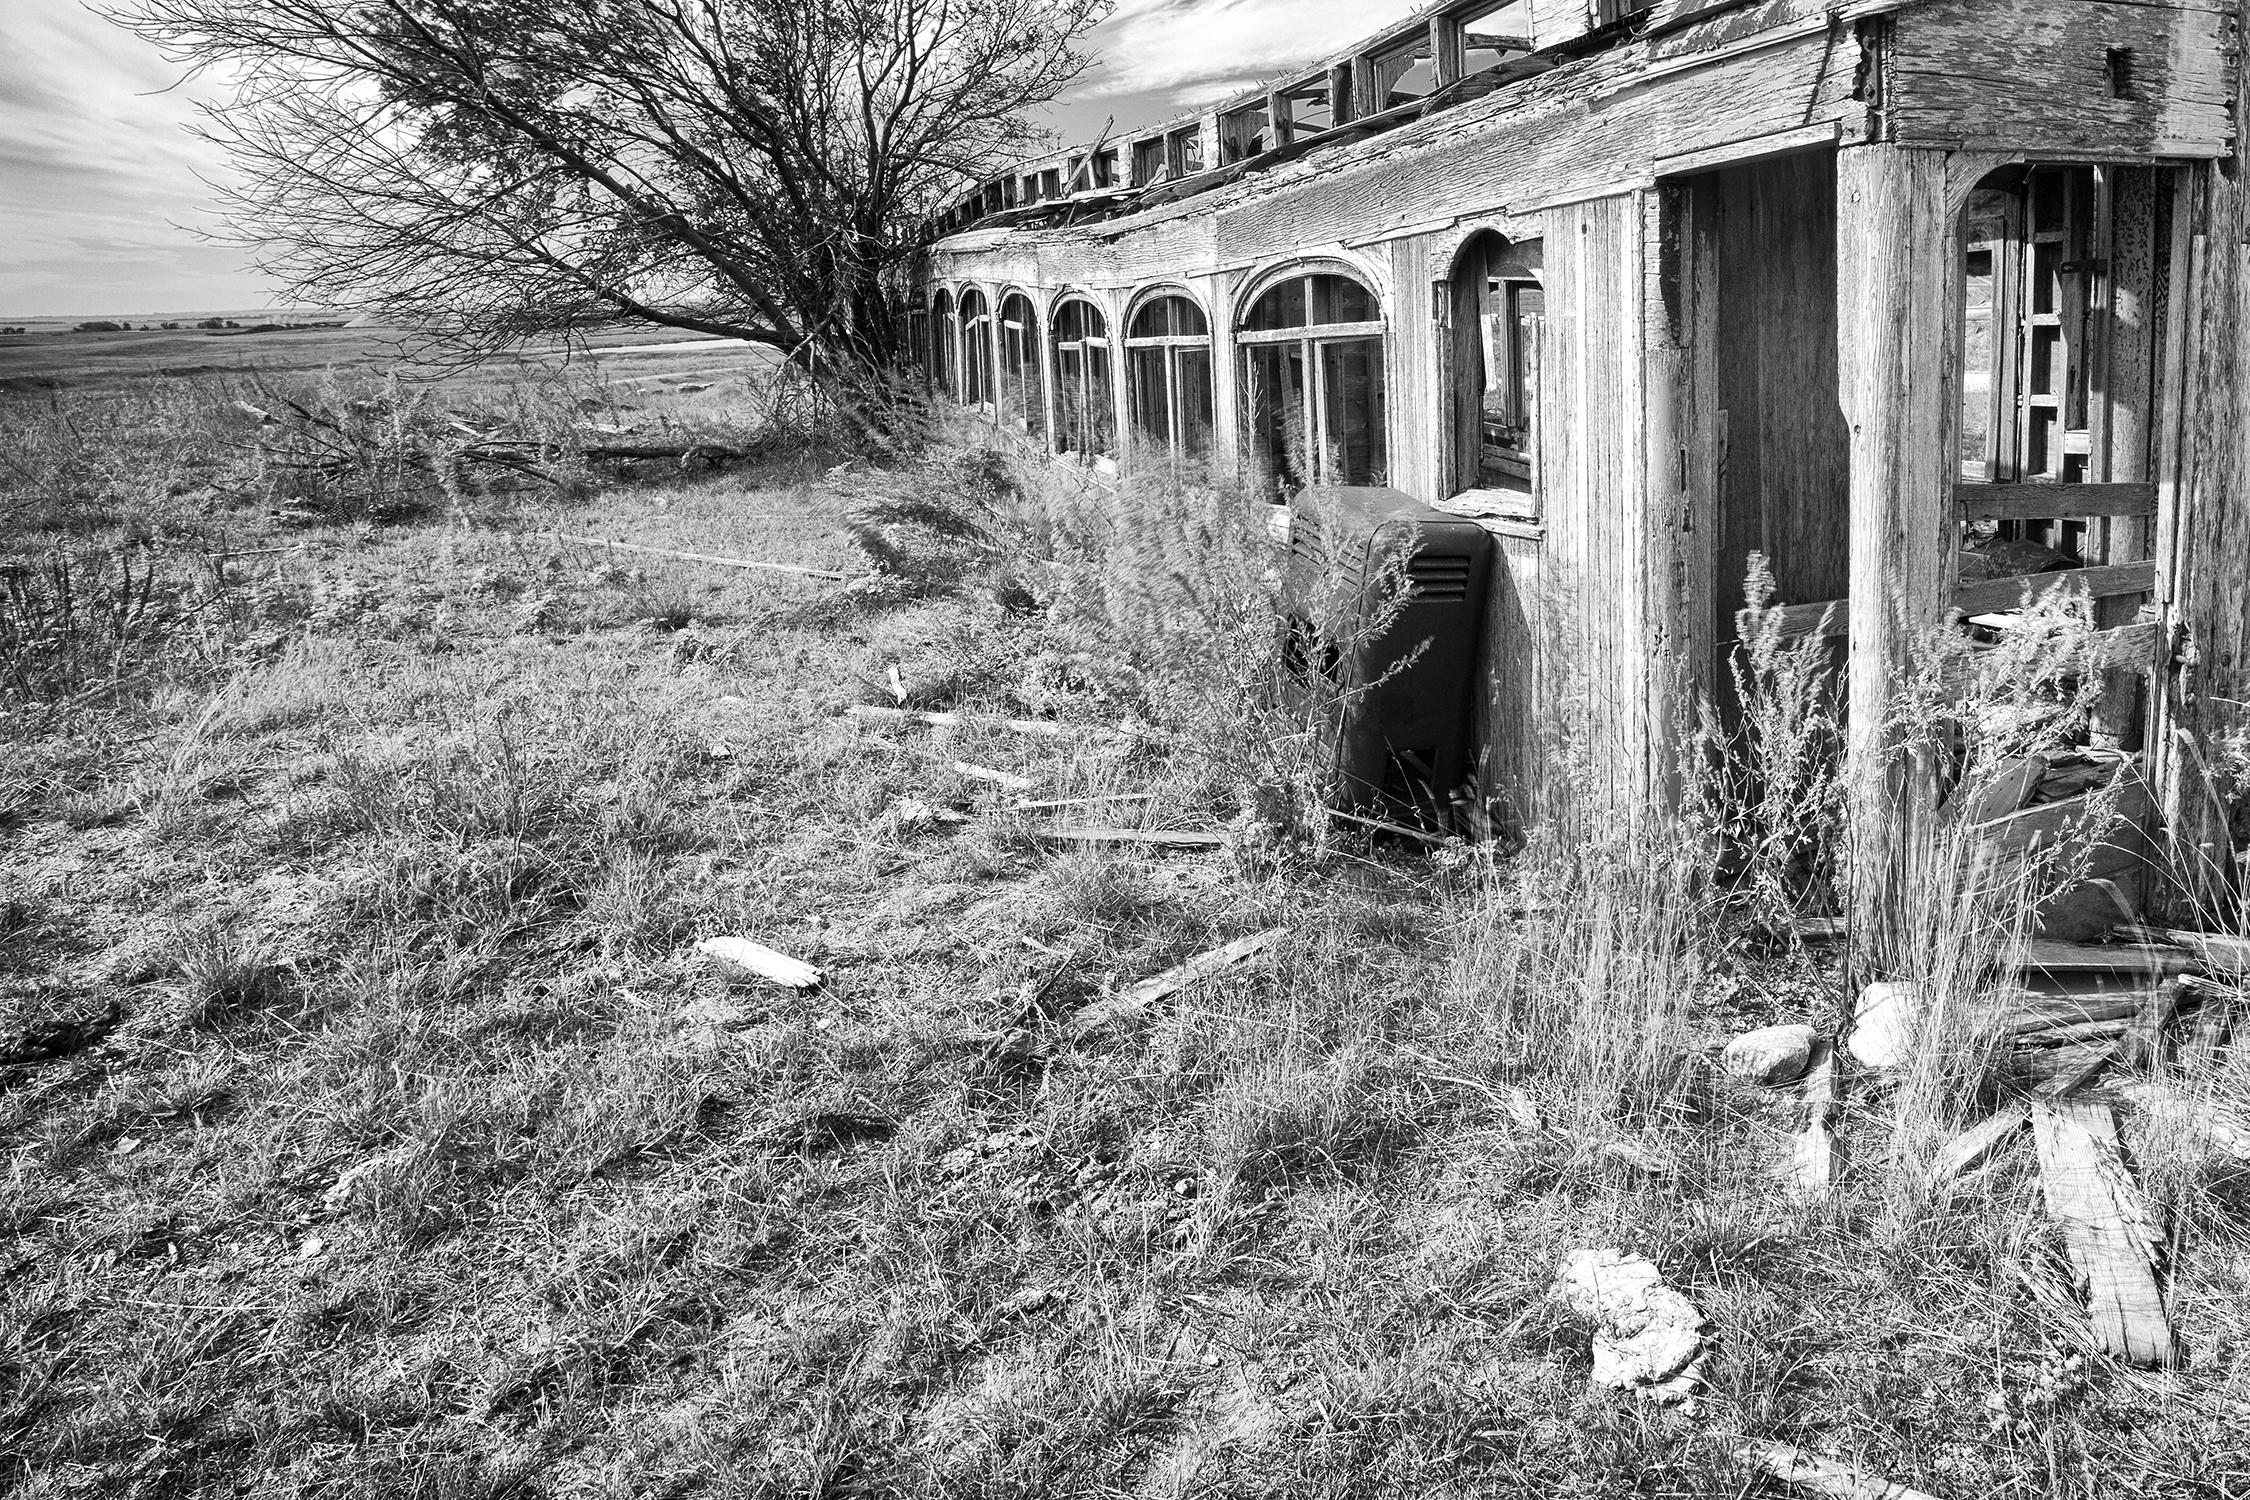 Rebecca Skinner’s “Great Norther Railcar” is a 16 x 24 inch contemporary black and white photograph of a weathered railcar resting in the beautiful North Dakota landscape. The frameless metal print has a satin finish and is infused directly into